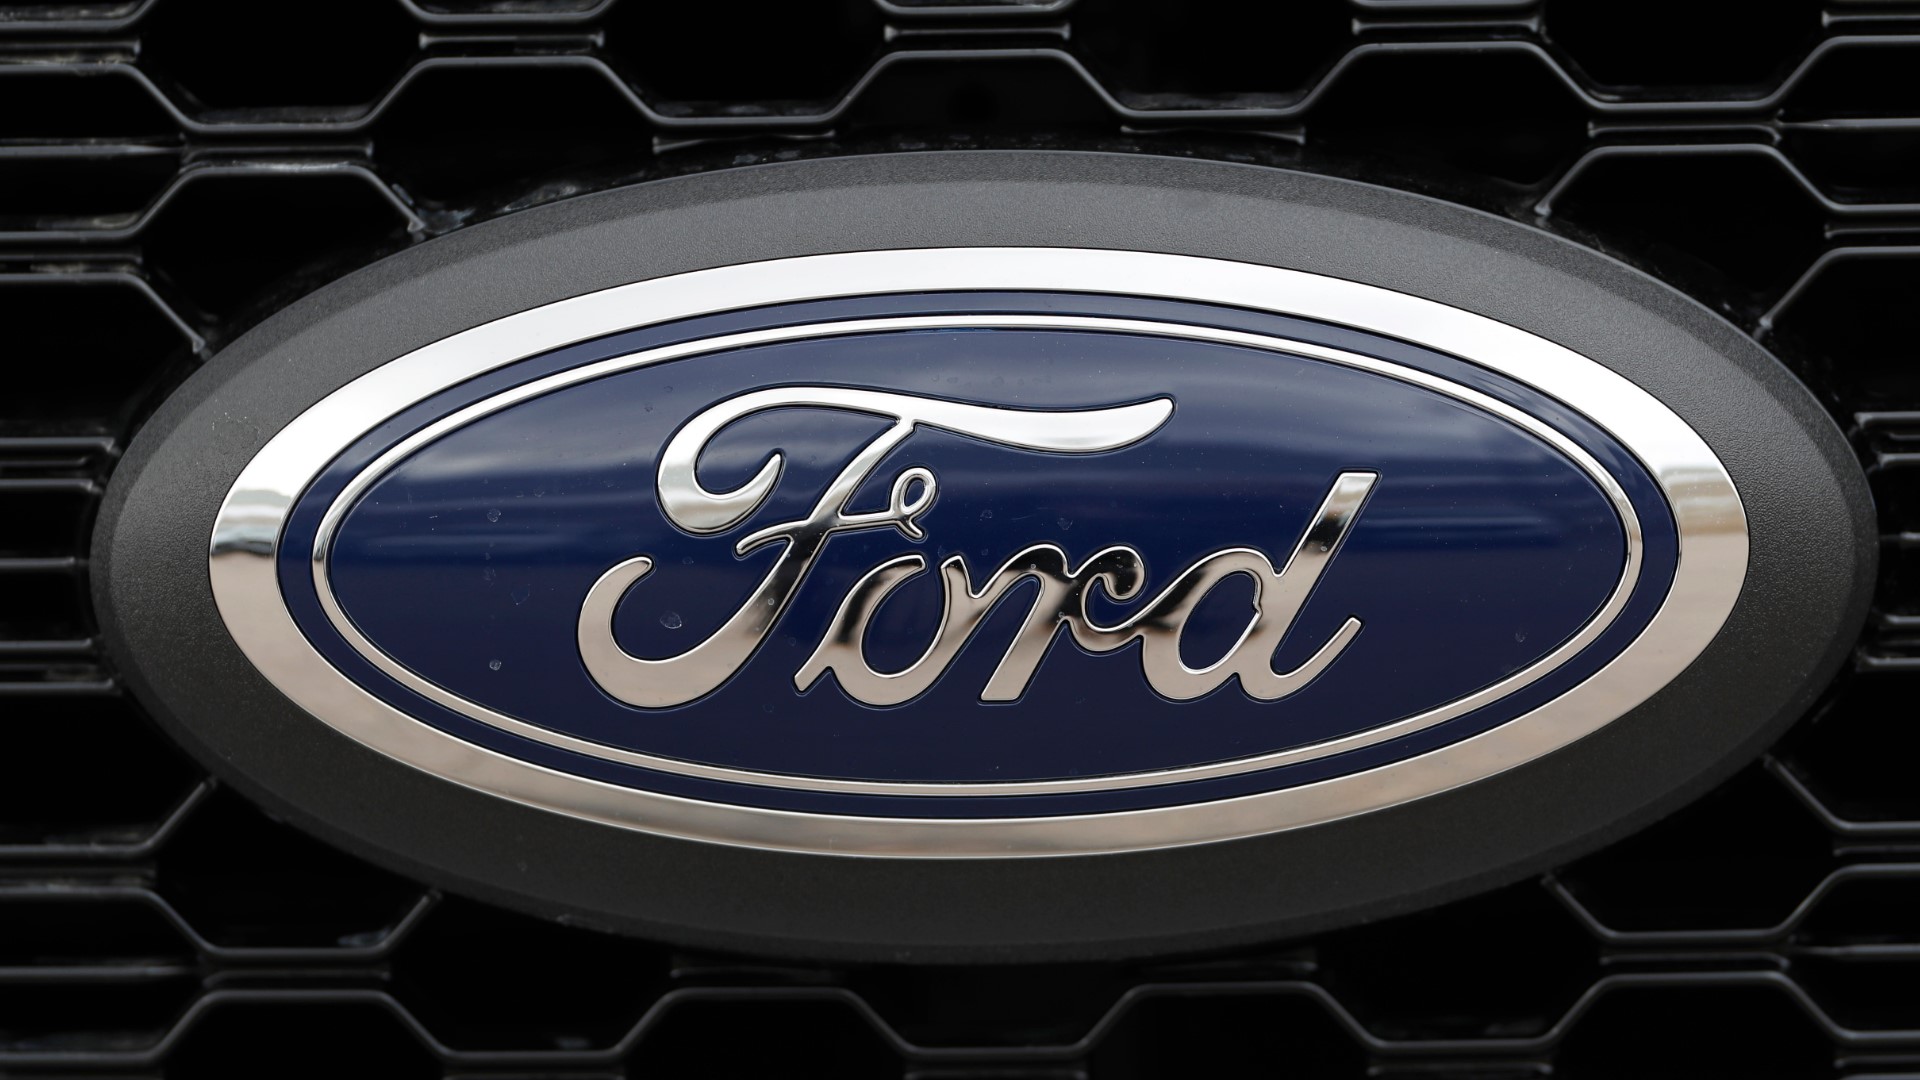 Ford is recalling over 108,000 midsize cars in North America to fix a problem that could stop the seat belts from holding people in a crash.